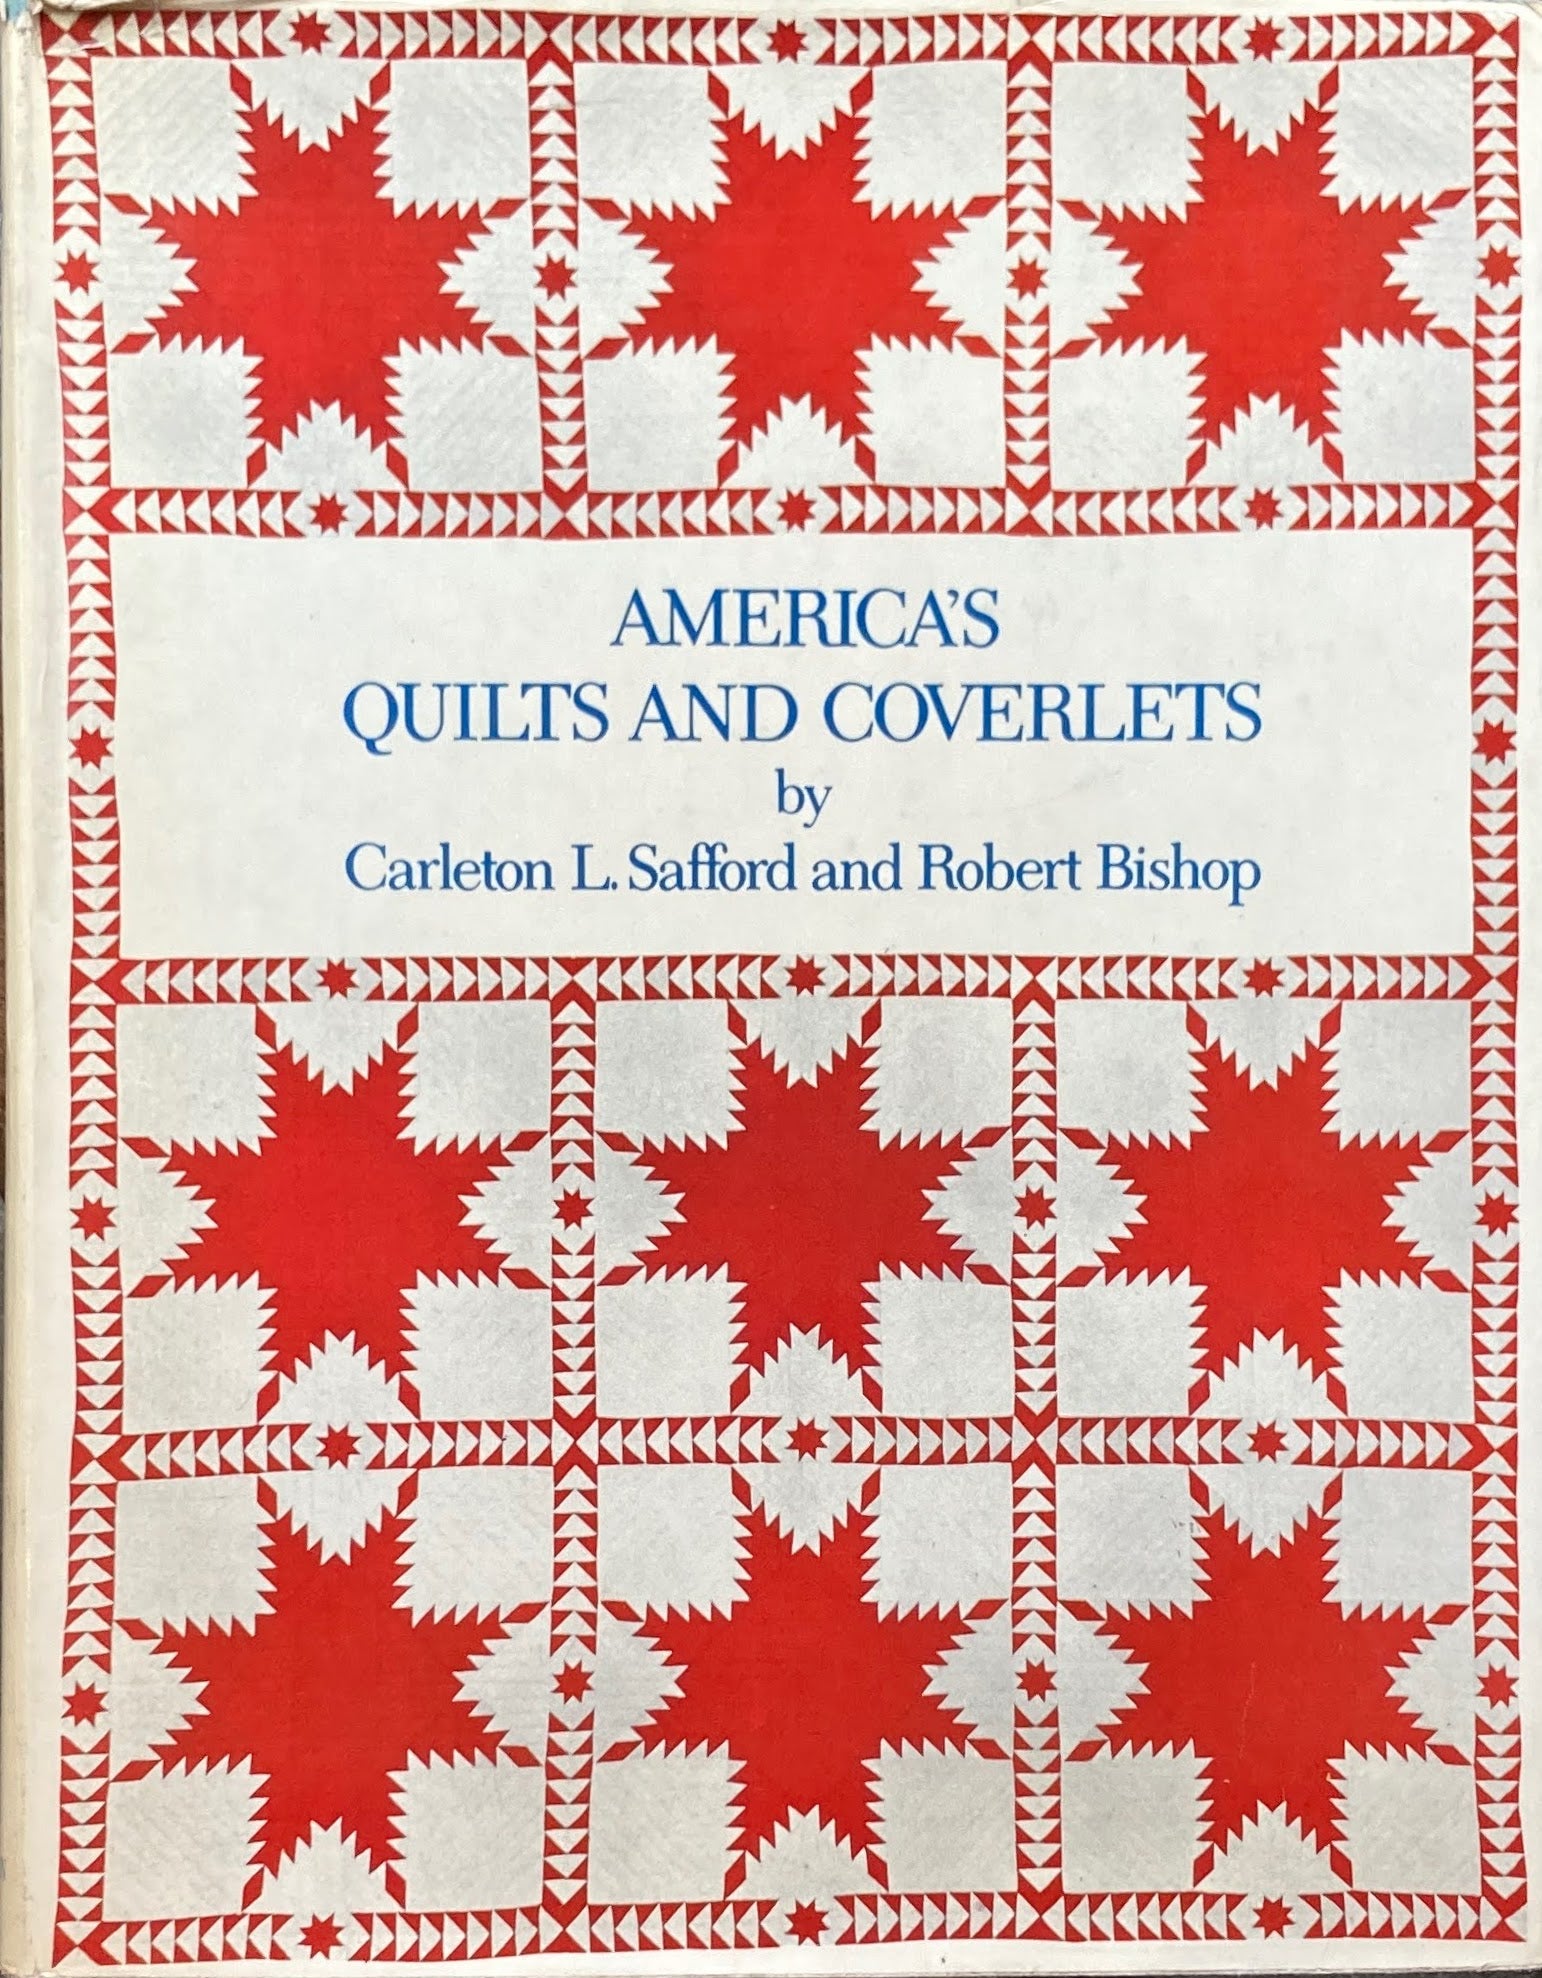 Americas Quilts And Coverlets by Carleton L. Safford and Robert Bishop